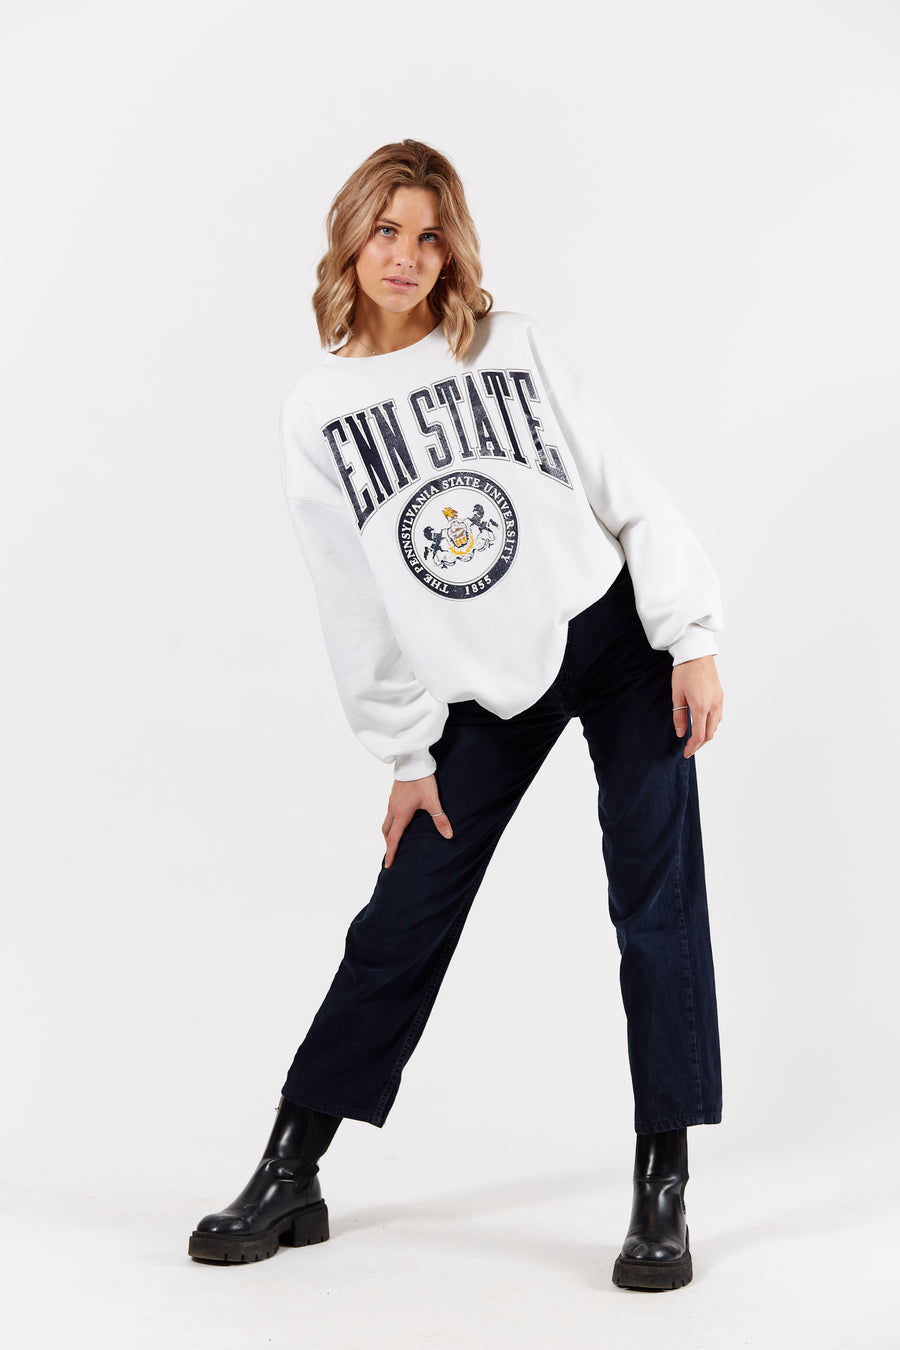 Penn State University Crewneck in a vintage style from thrift store Twise Studio